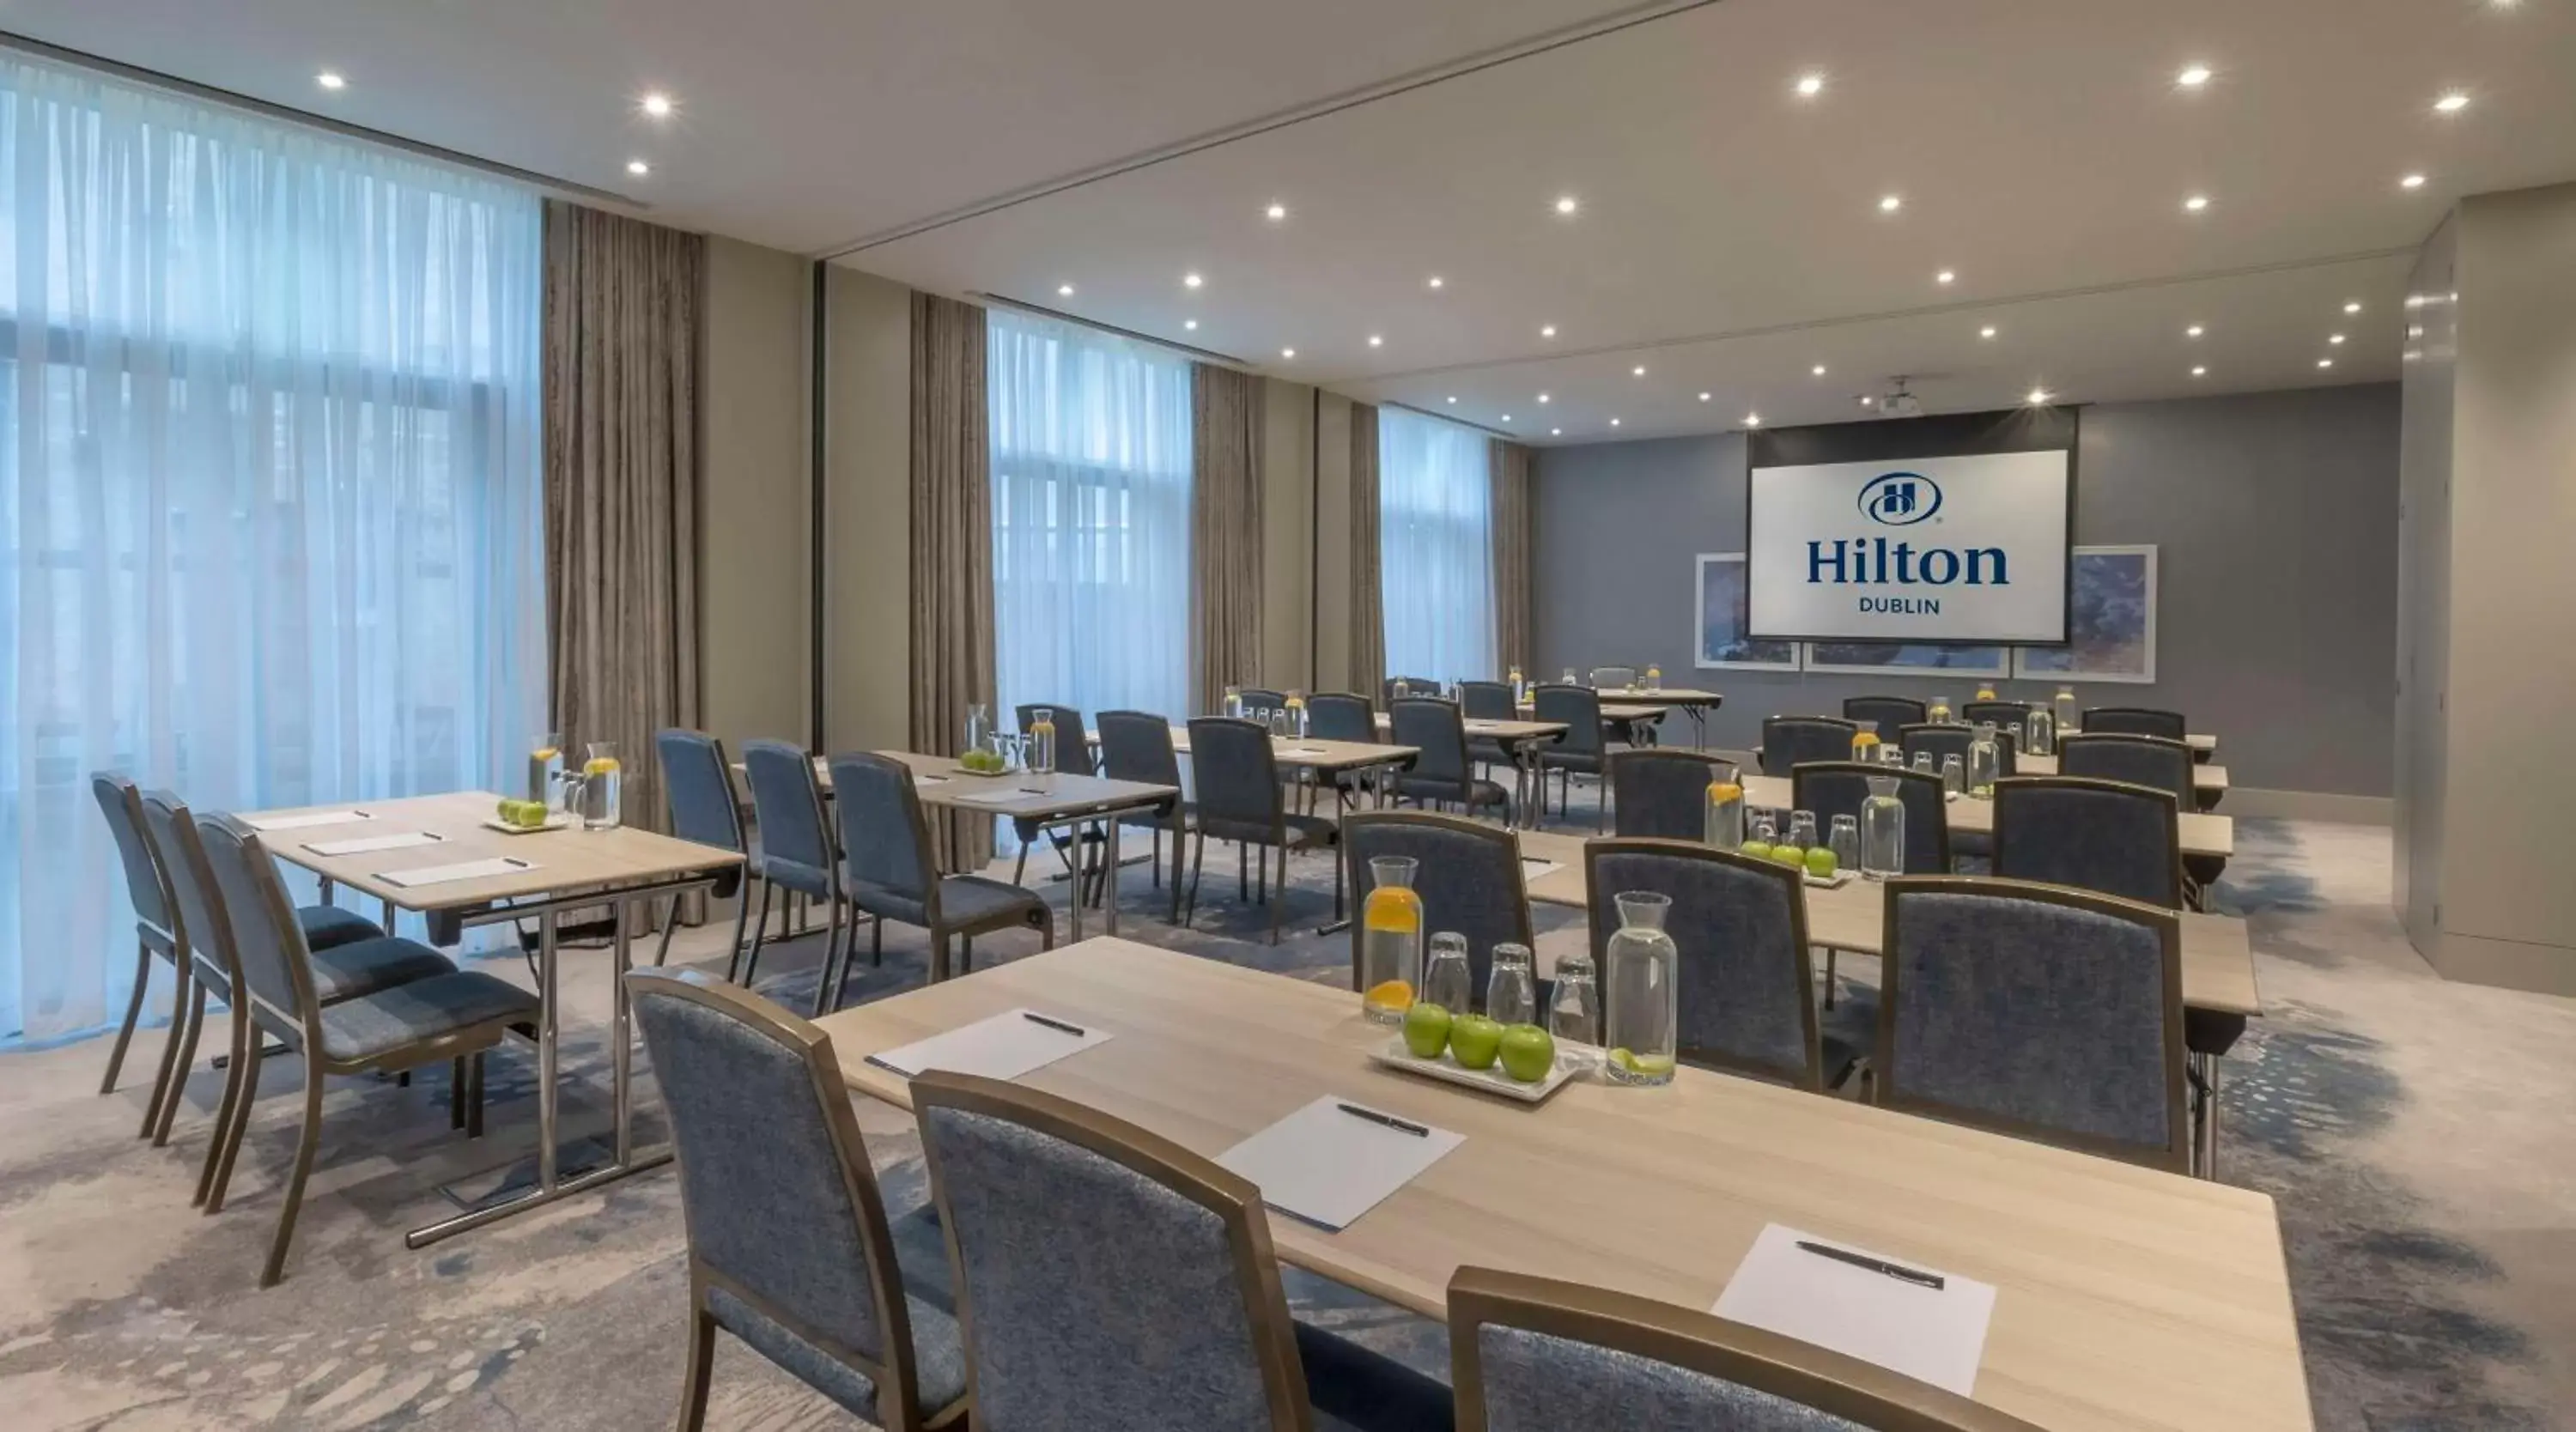 Meeting/conference room in Hilton Dublin